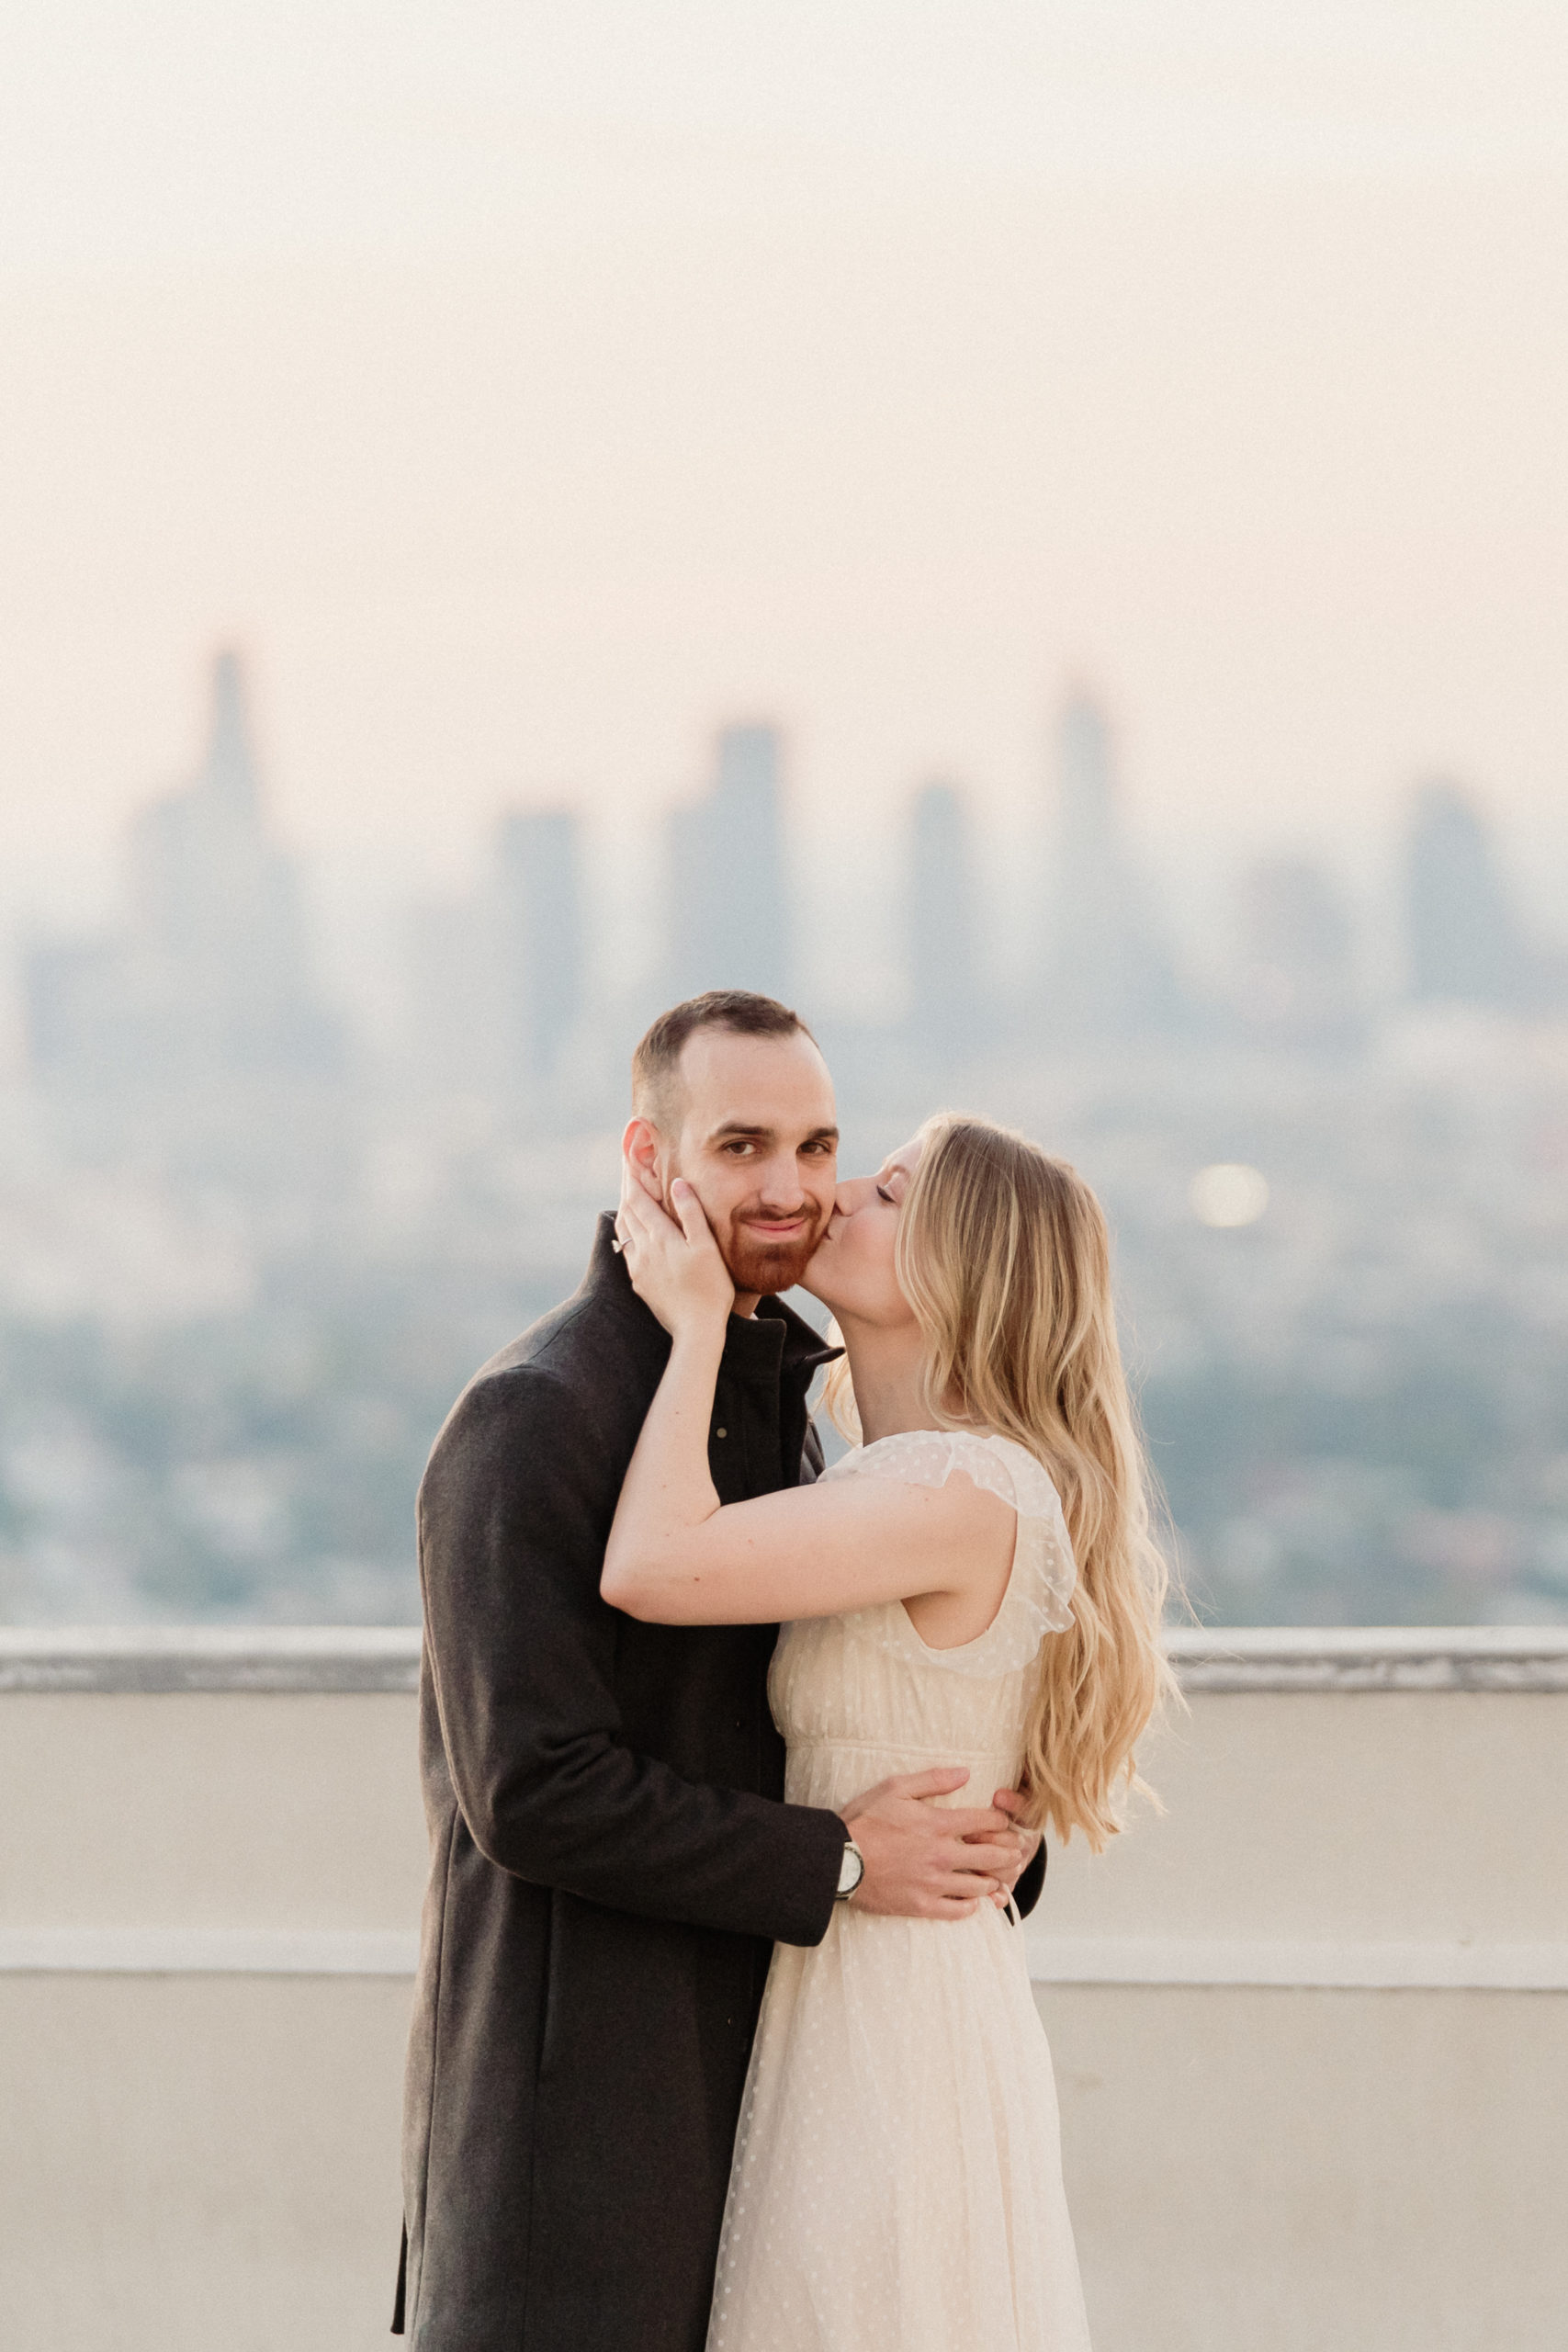 woman wearing an ivory dress kissing her fiance on the cheek at their griffith observatory engagement session overlooking the Los Angeles skyline at sunrise